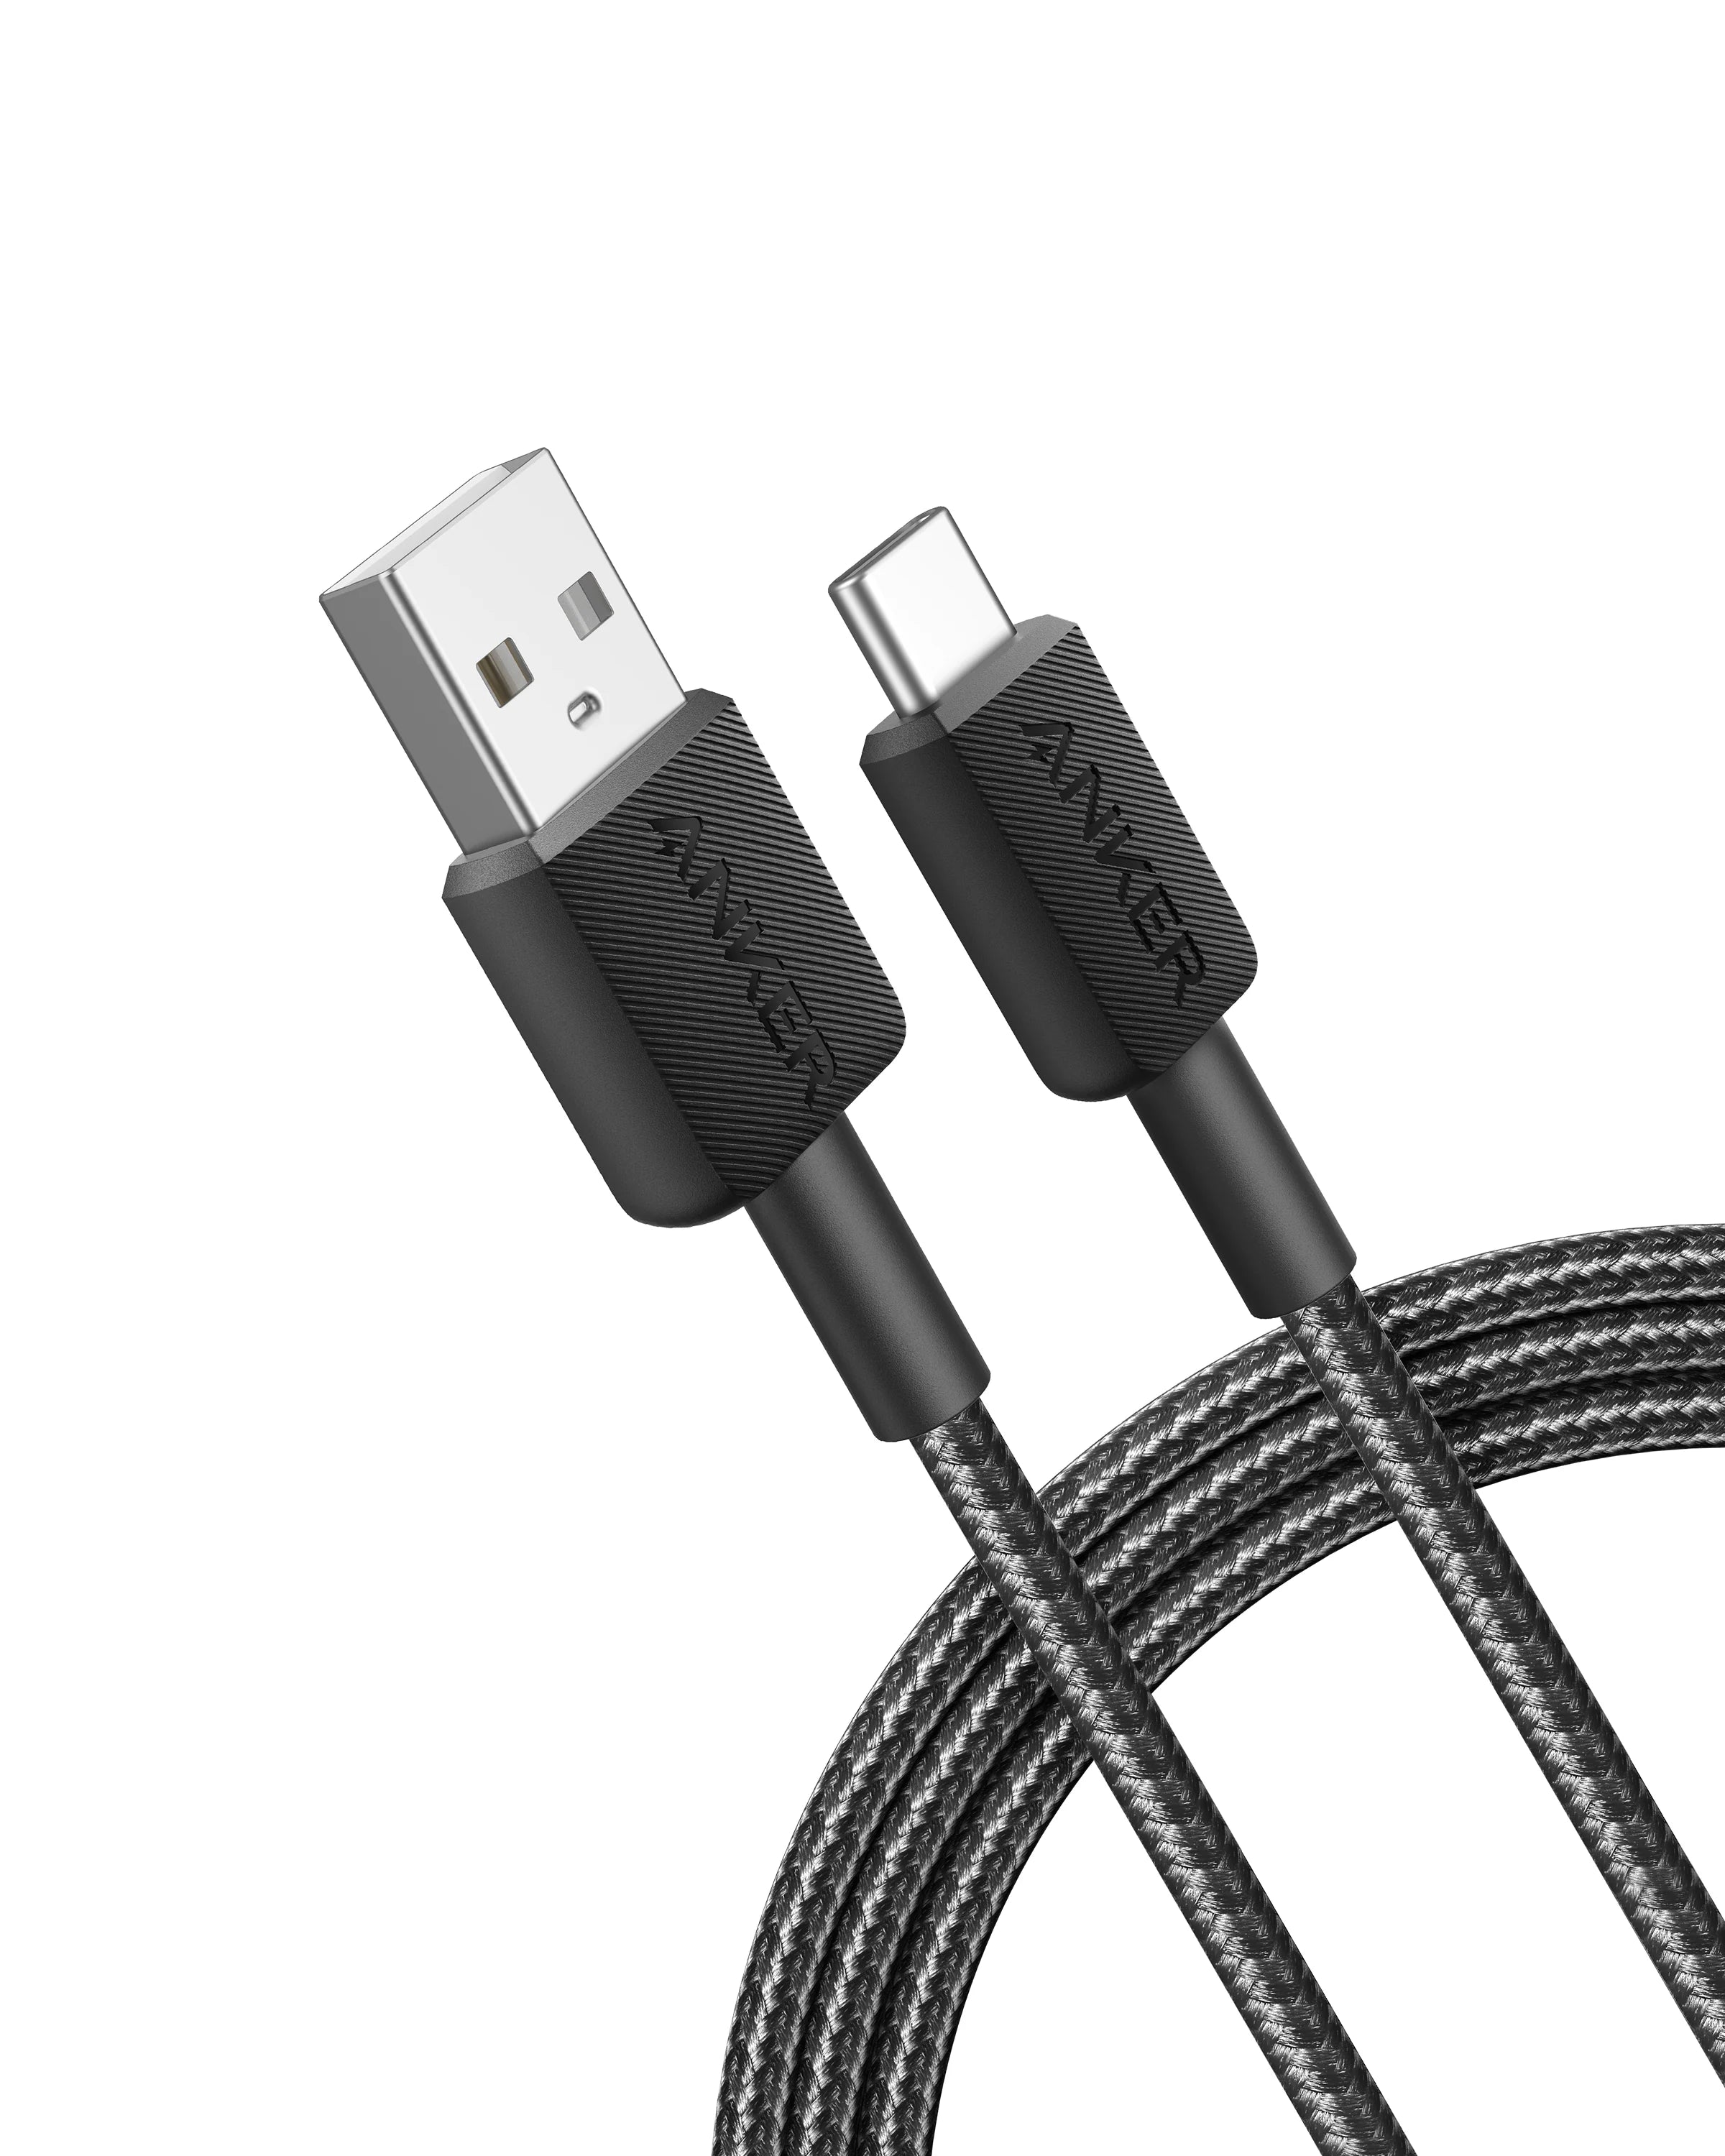 Anker 322 USB-A to USB-C Cable Braided 0.9m with 18 months warranty